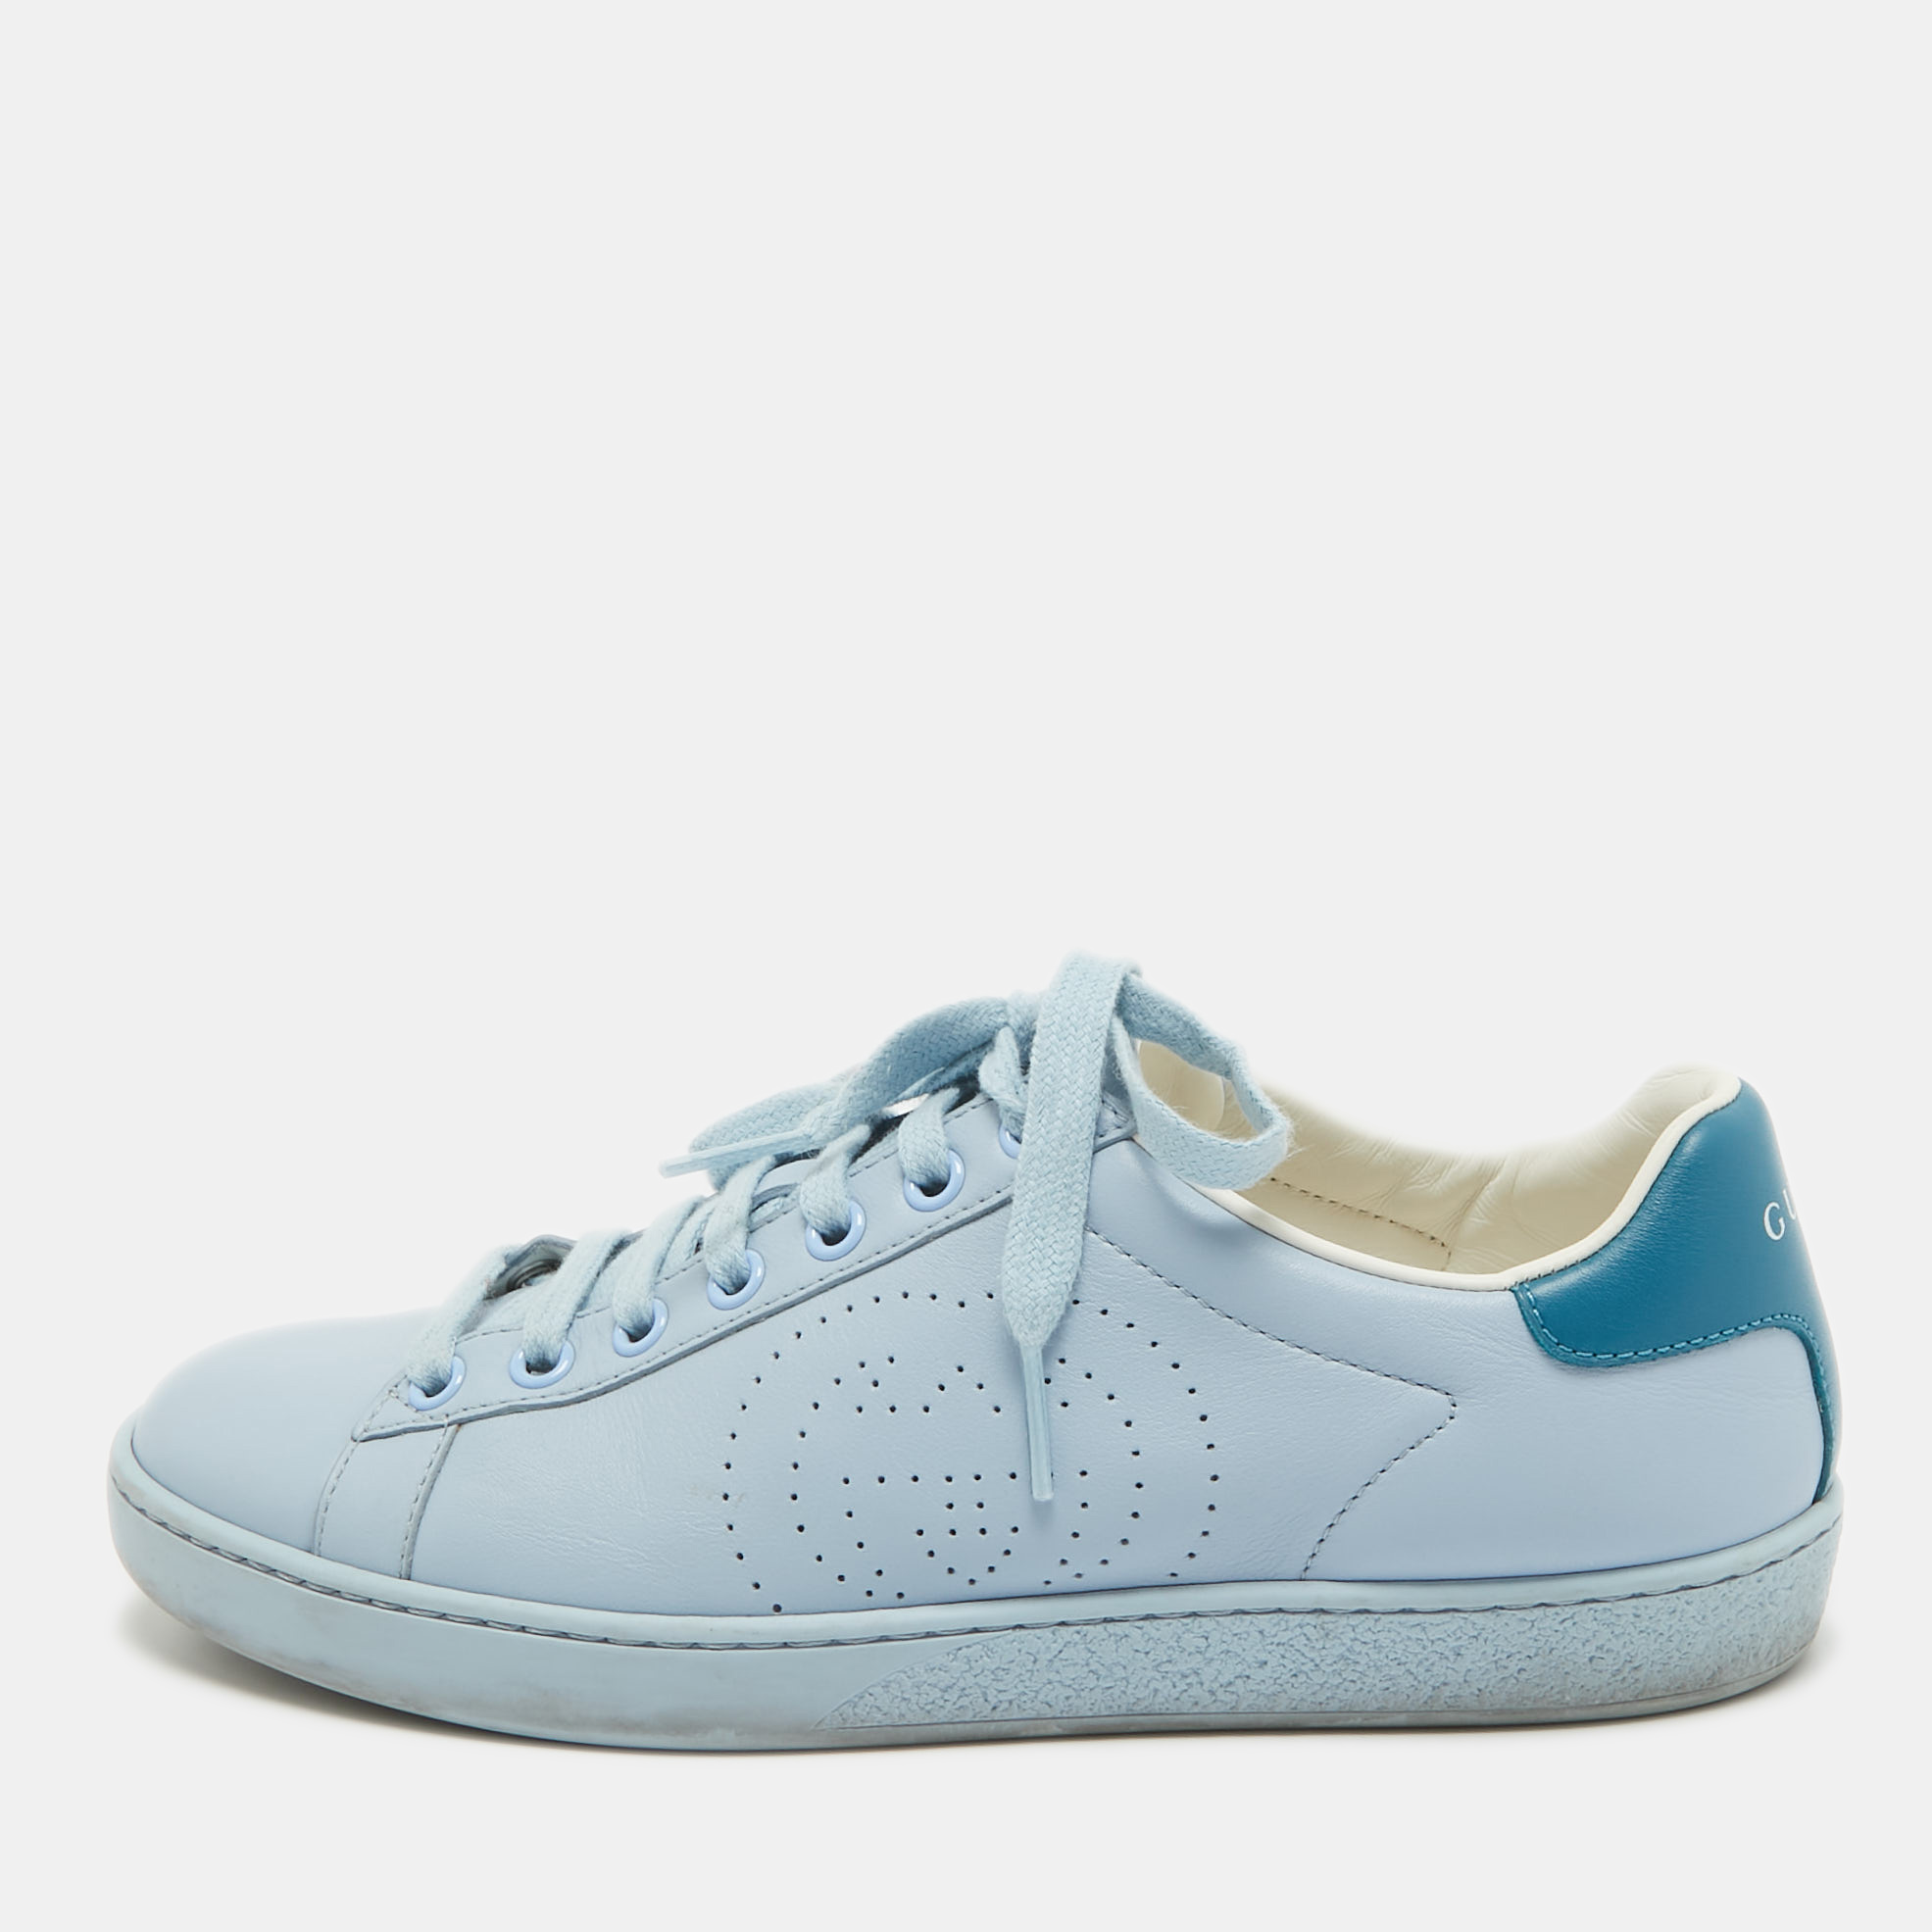 Gucci blue leather perforated interlocking g ace sneakers size 35.5